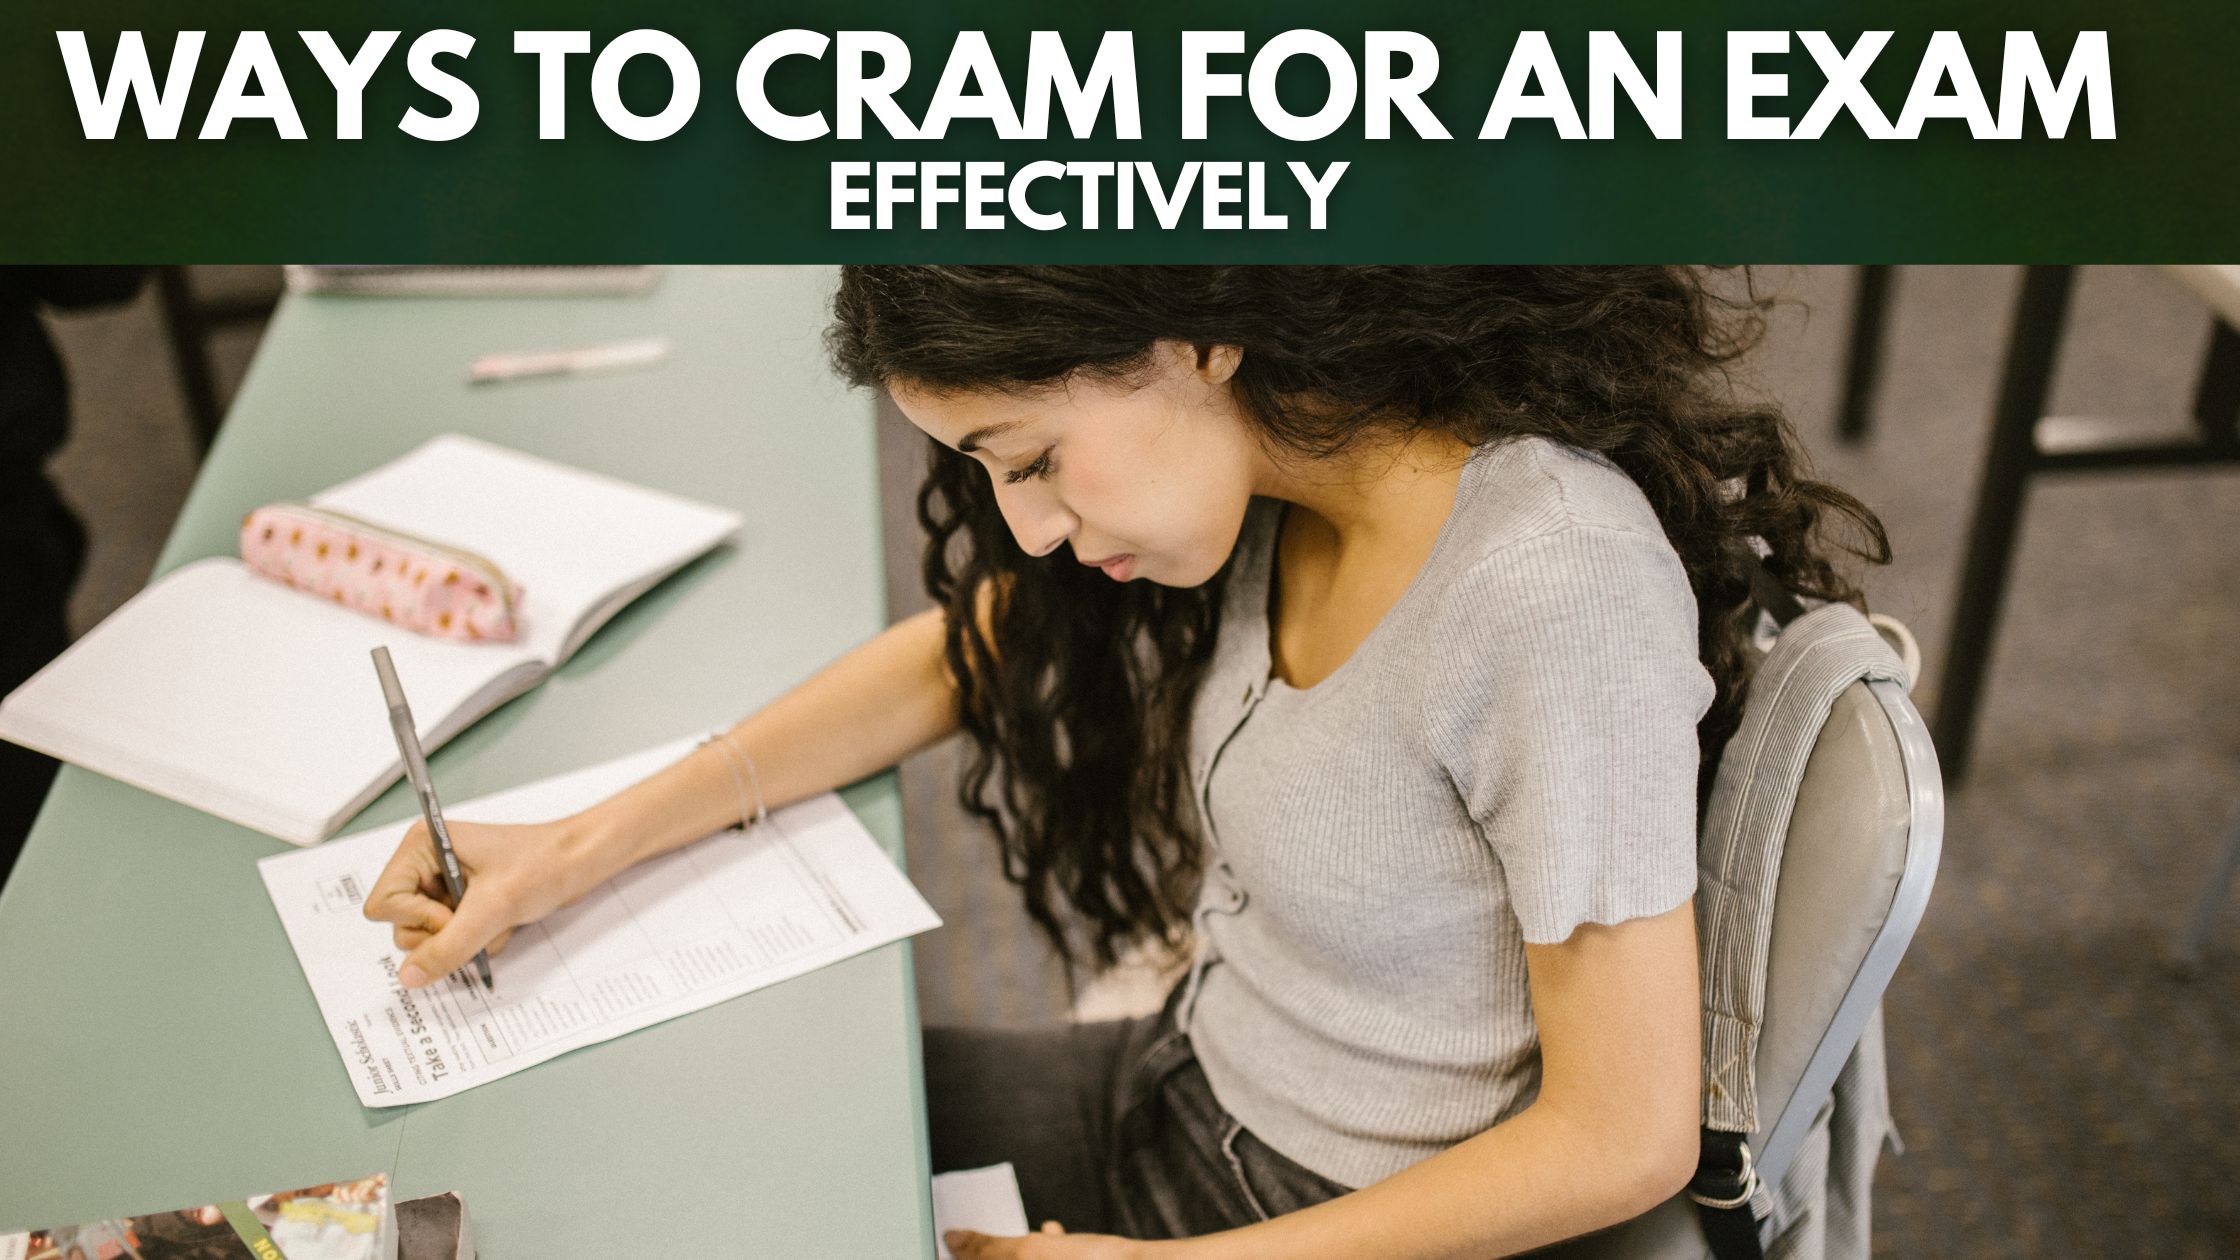 Top 10 Effective Ways to Cram for an Exam